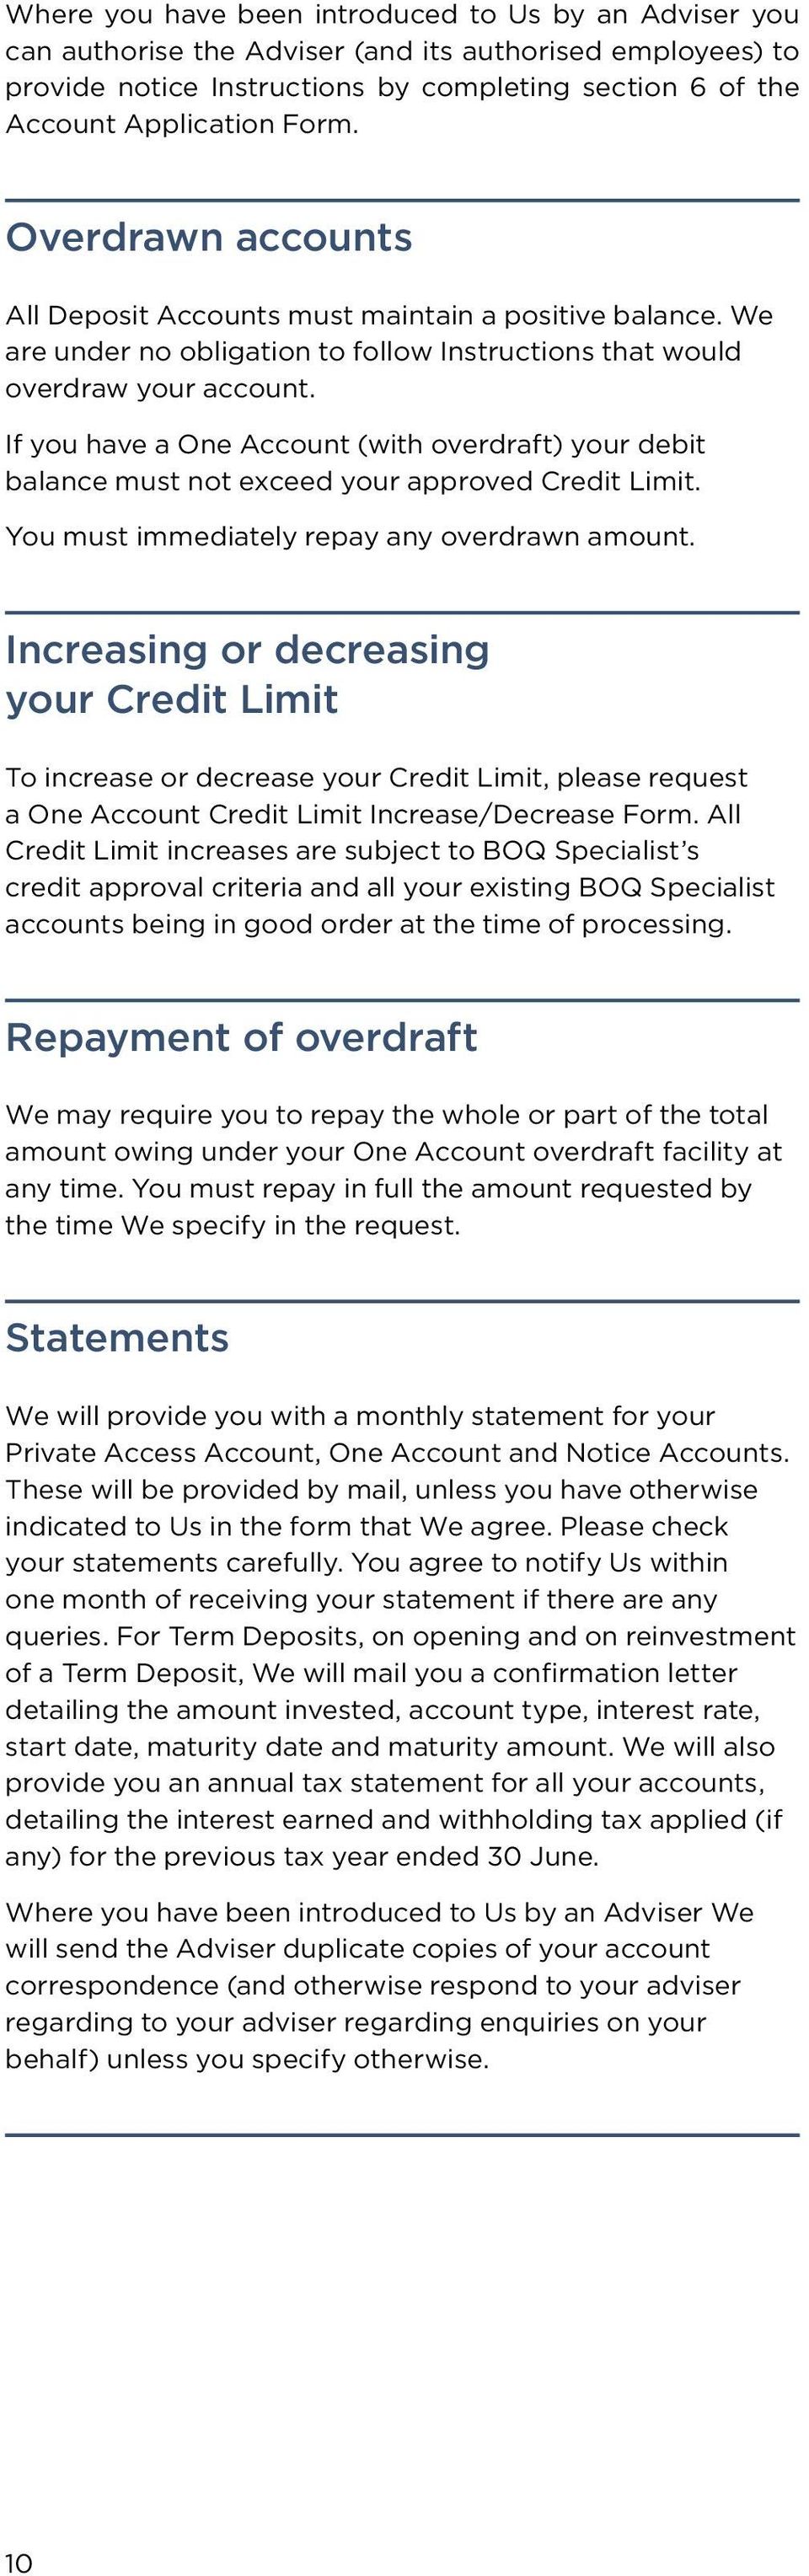 If you have a One Account (with overdraft) your debit balance must not exceed your approved Credit Limit. You must immediately repay any overdrawn amount.